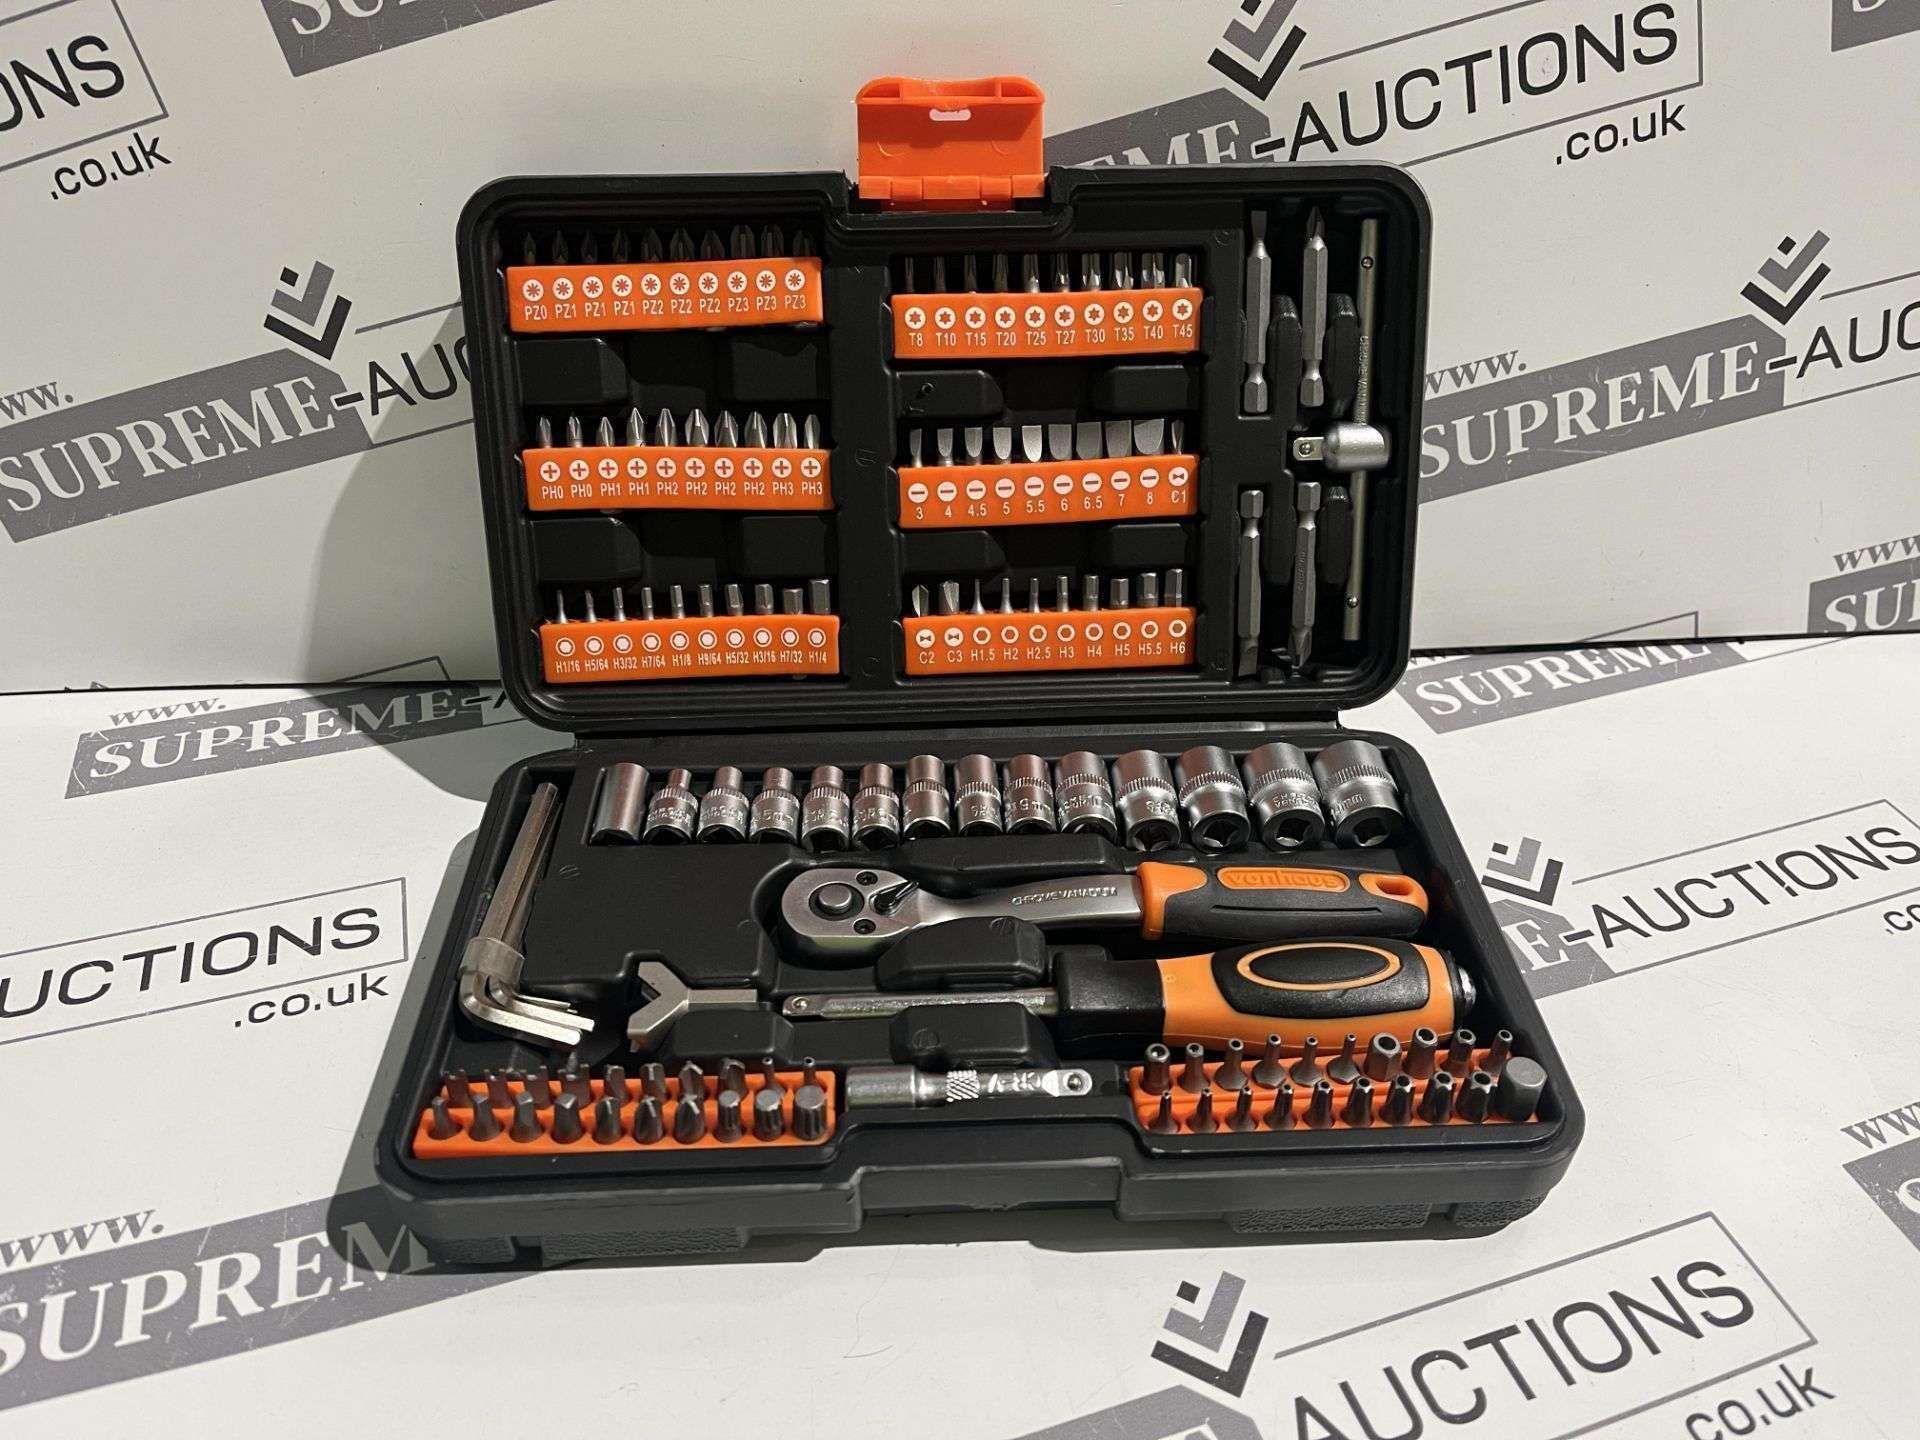 2 X BRAND NEW 130 PIECE PREMIUM SOCKET AND TOOL SETS R18-3